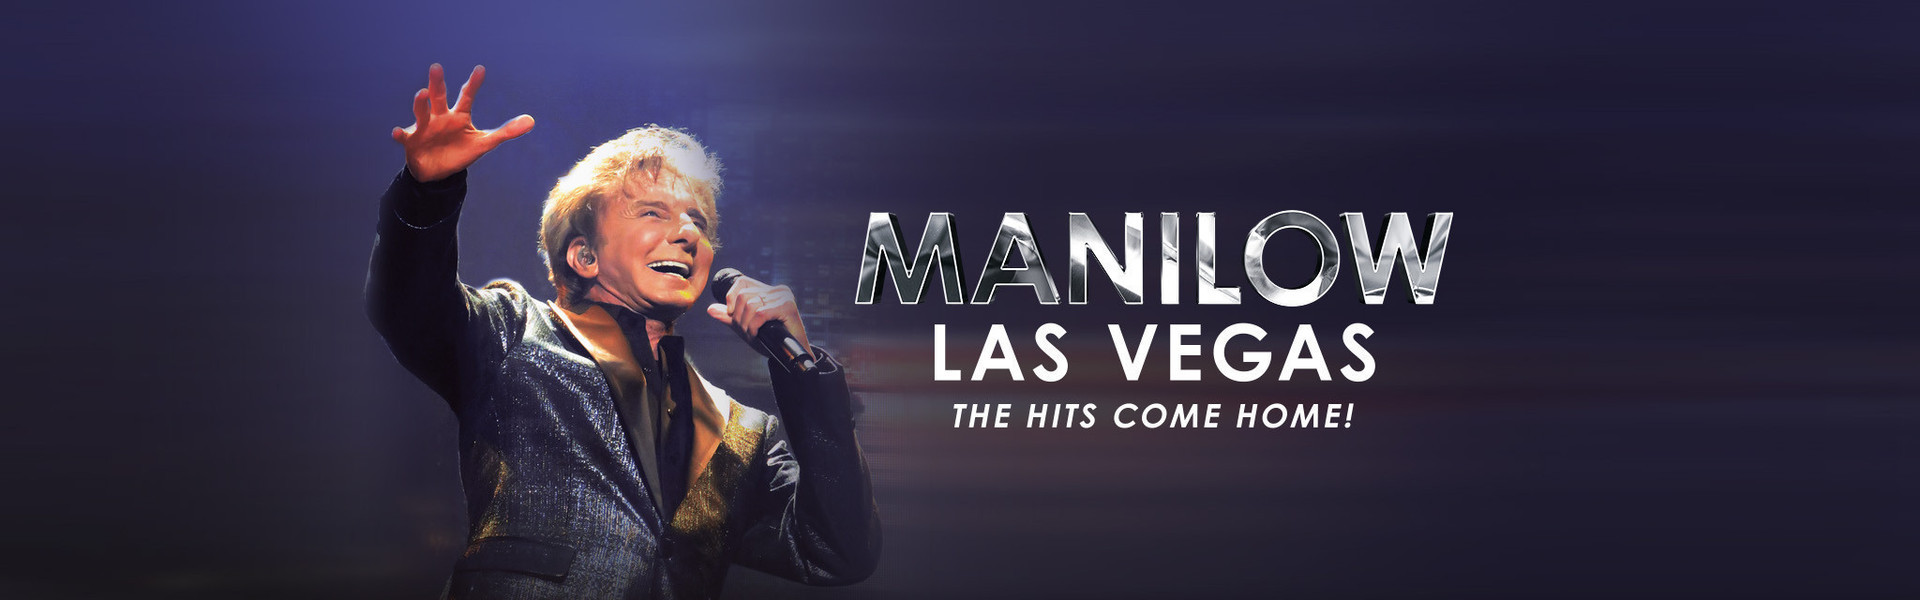 Manilow The Hits Come Home Barry Manilow Greatest Hits Concert Tour